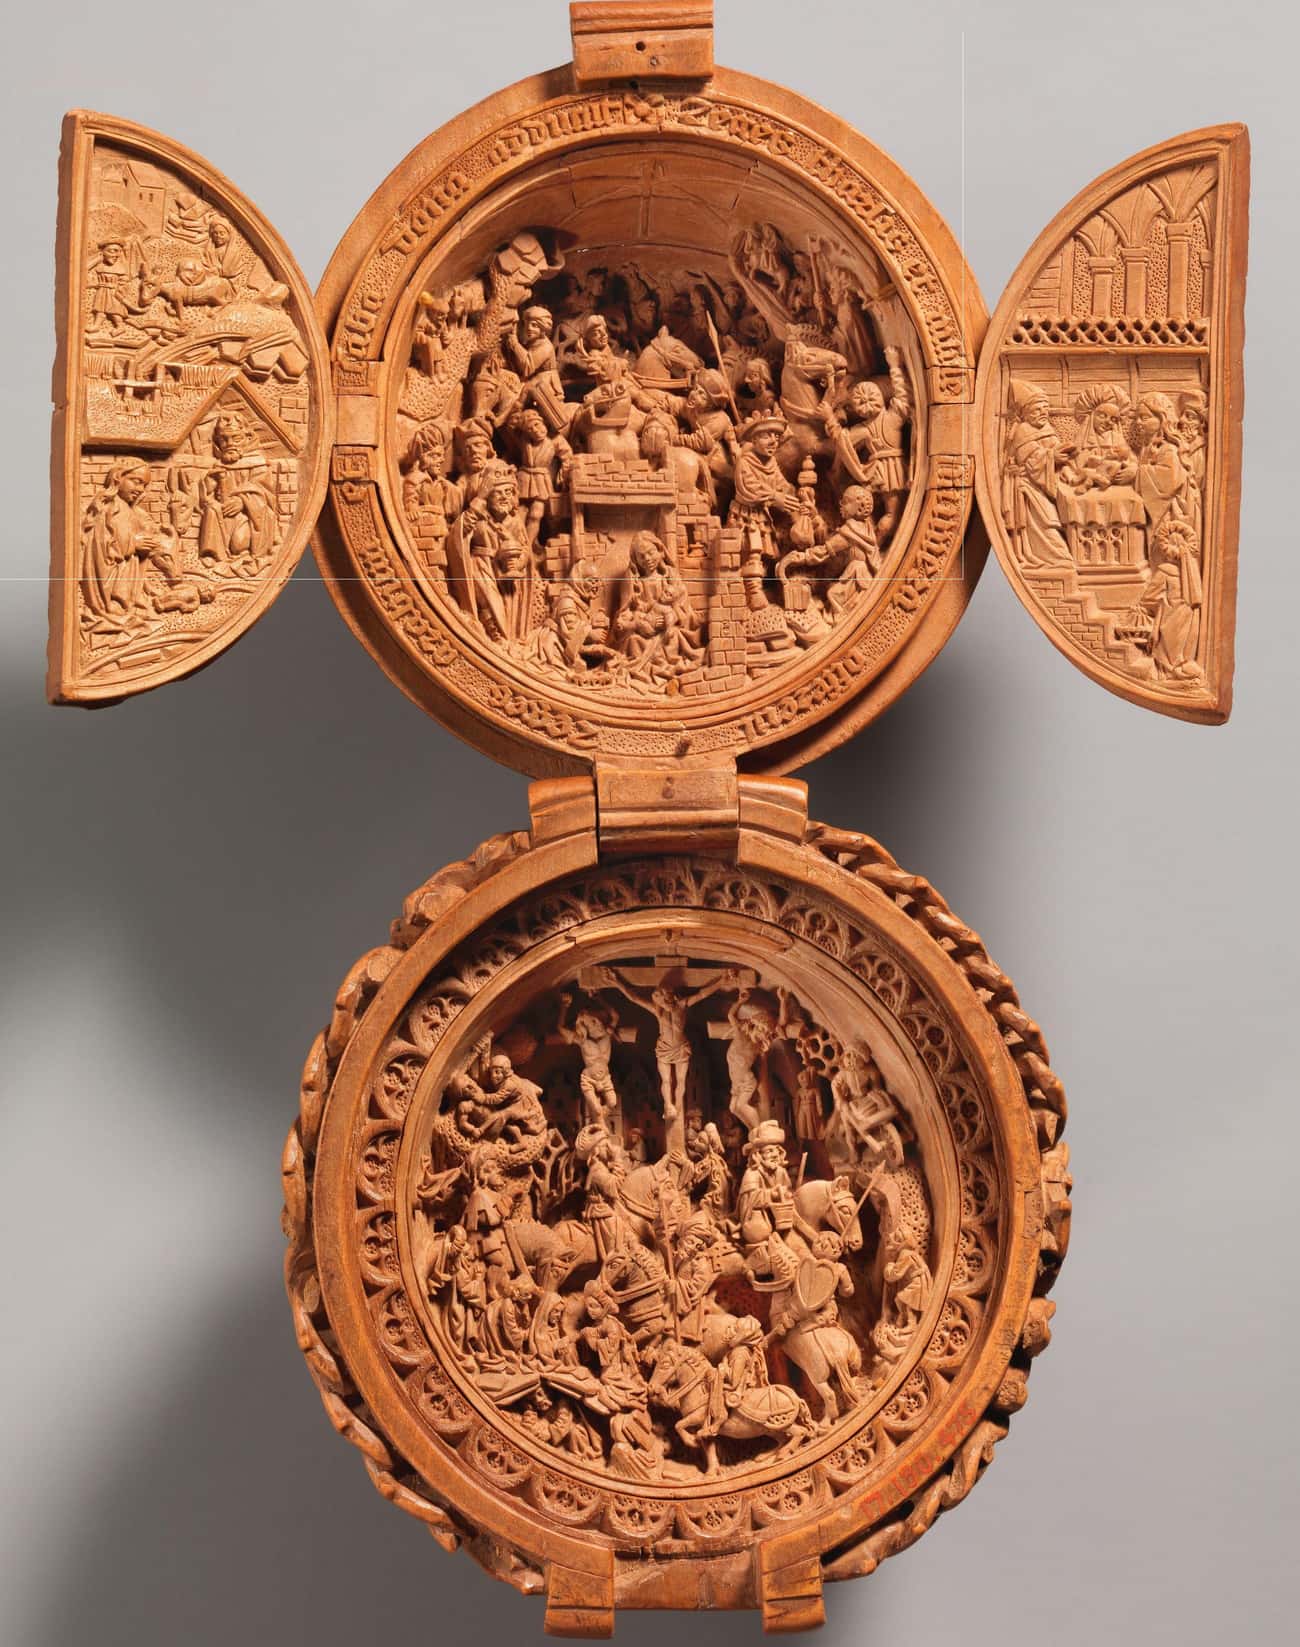 Only 135 Known Boxwood Carvings Exist Today